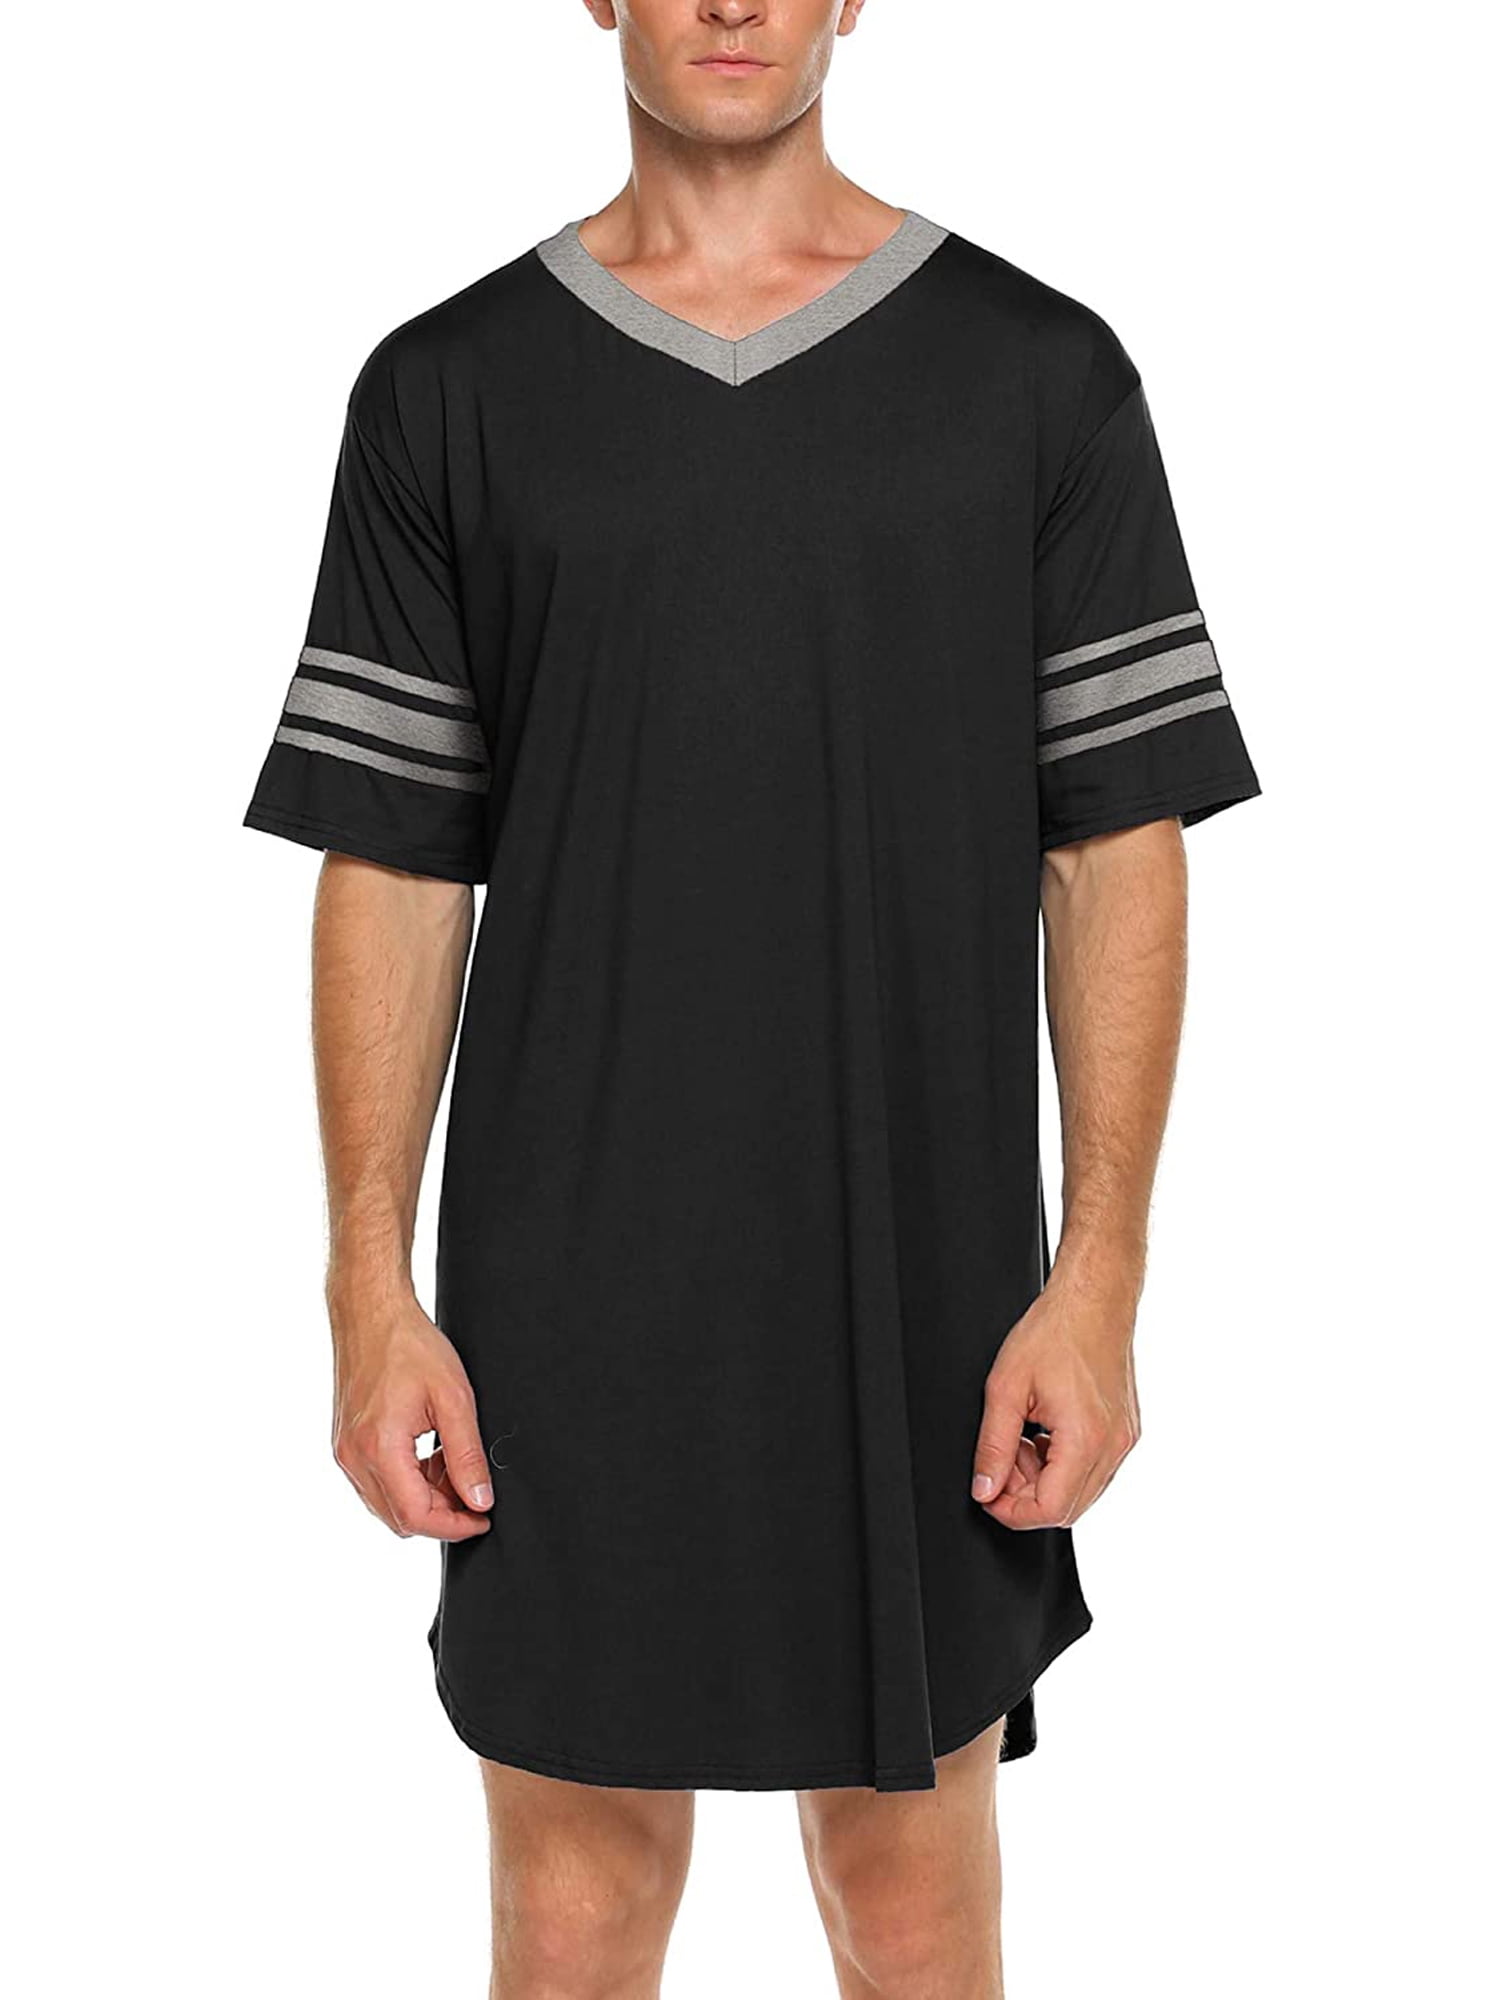 SUITLIM Mens Short Sleeve Cotton Nightshirts for Sleeping V Neck Oversized Sleep Shirts Big and Tall Loose Sleepgowns